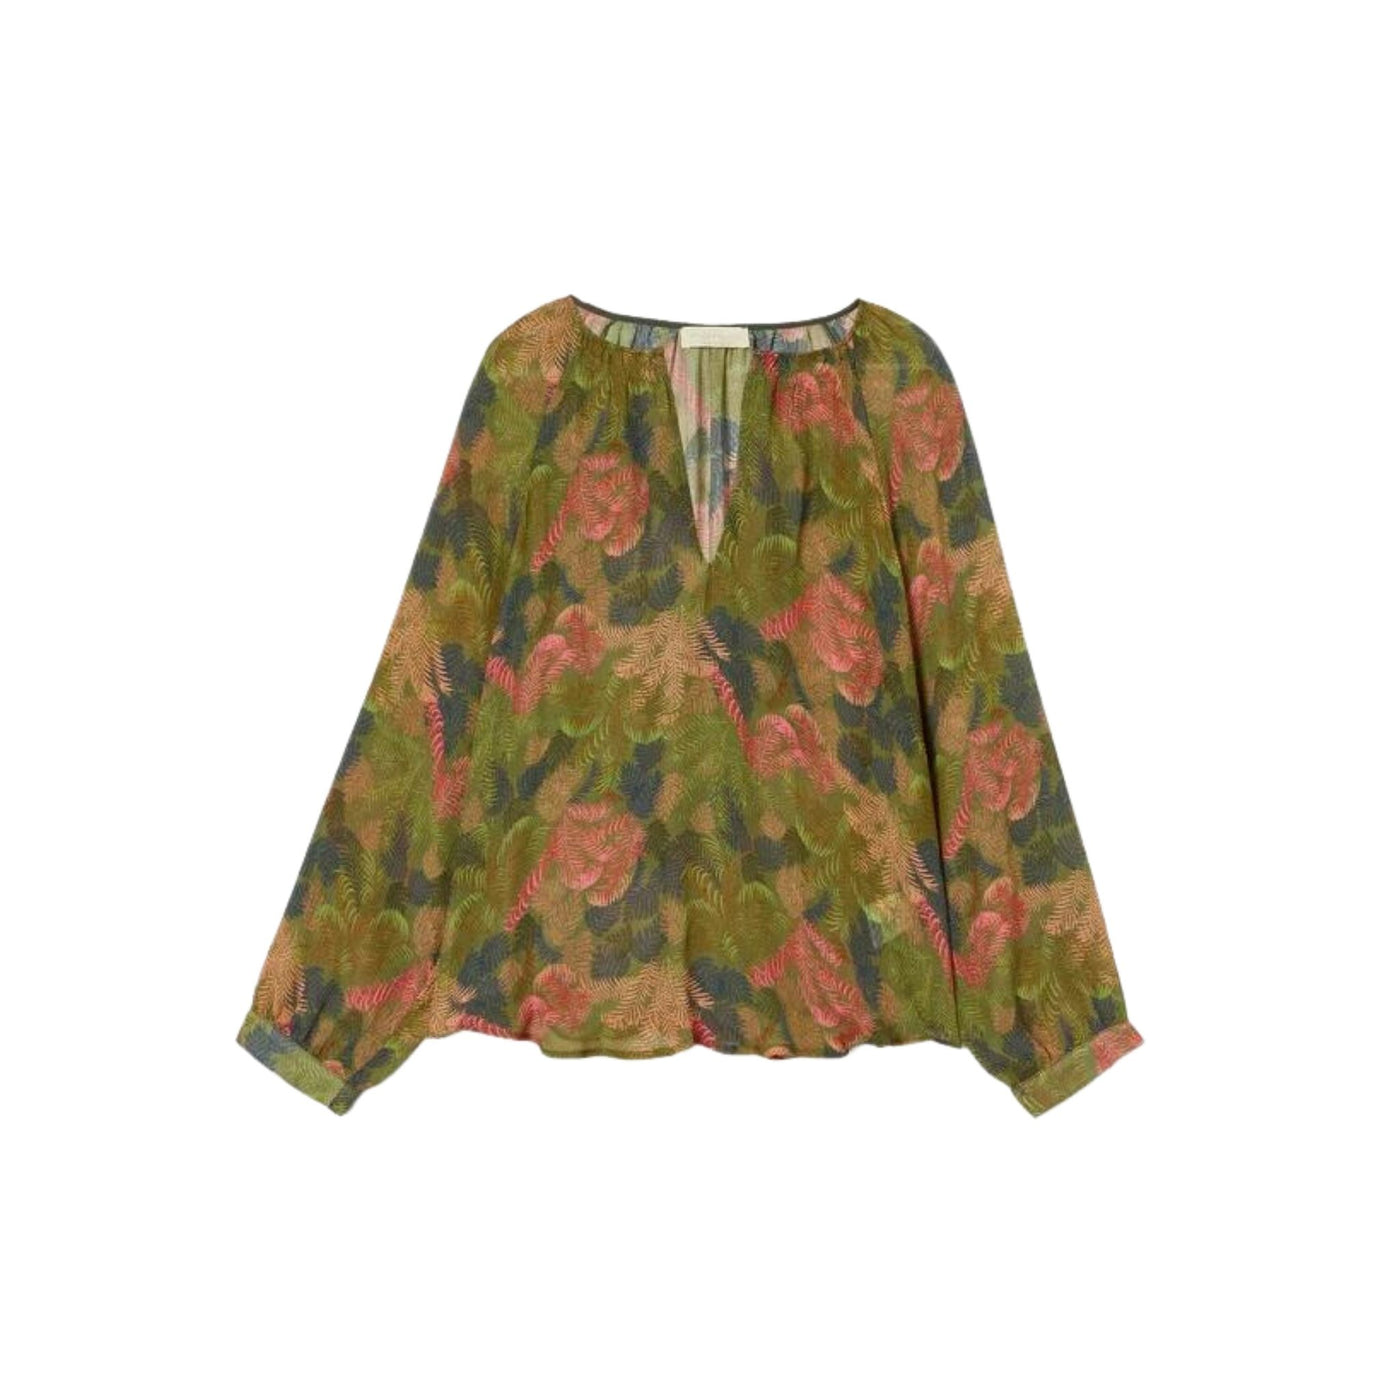 Women's blouse with leaf print